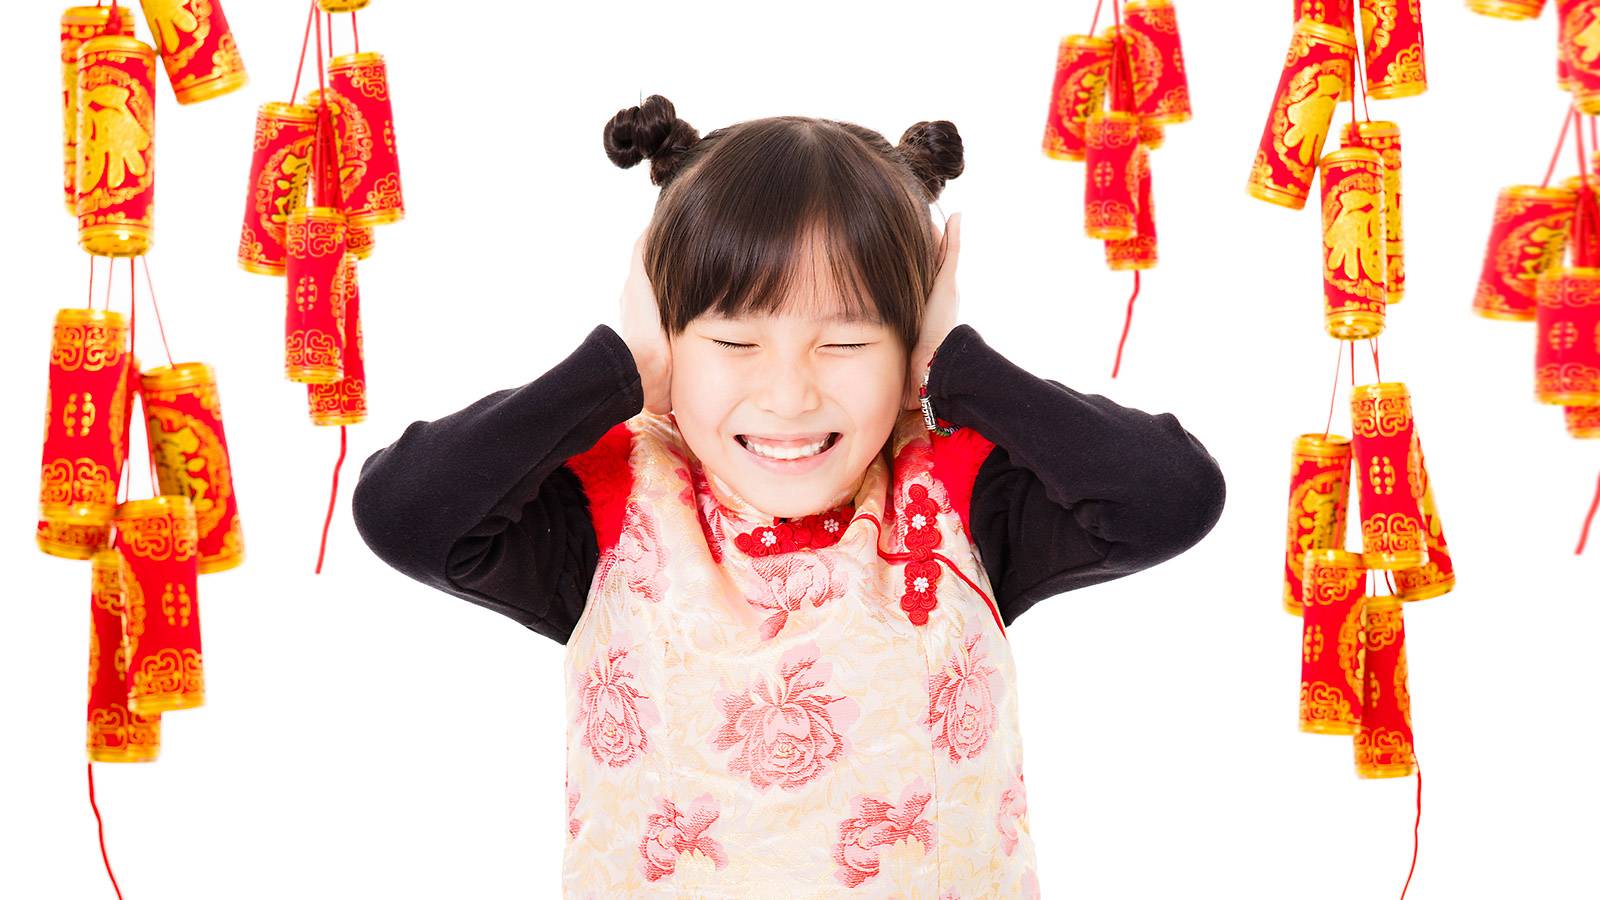 Parents-Handling-nosy-questions-and-other-CNY-etiquette1